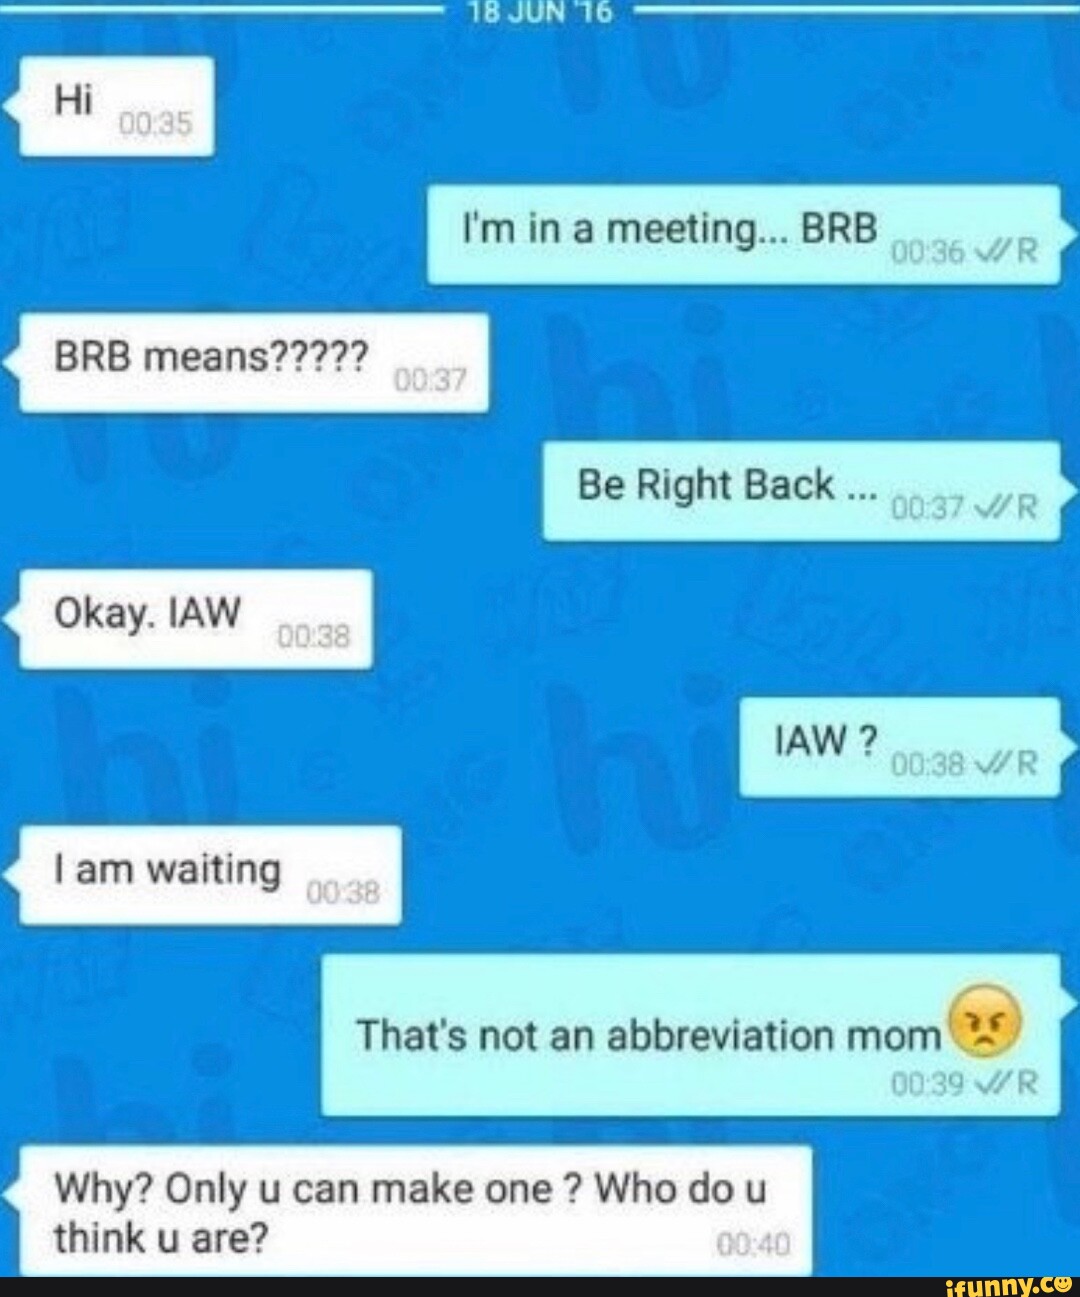 JUN I'm in a meeting BRB 00'36 WR Be Right Back BRE means? Okay.